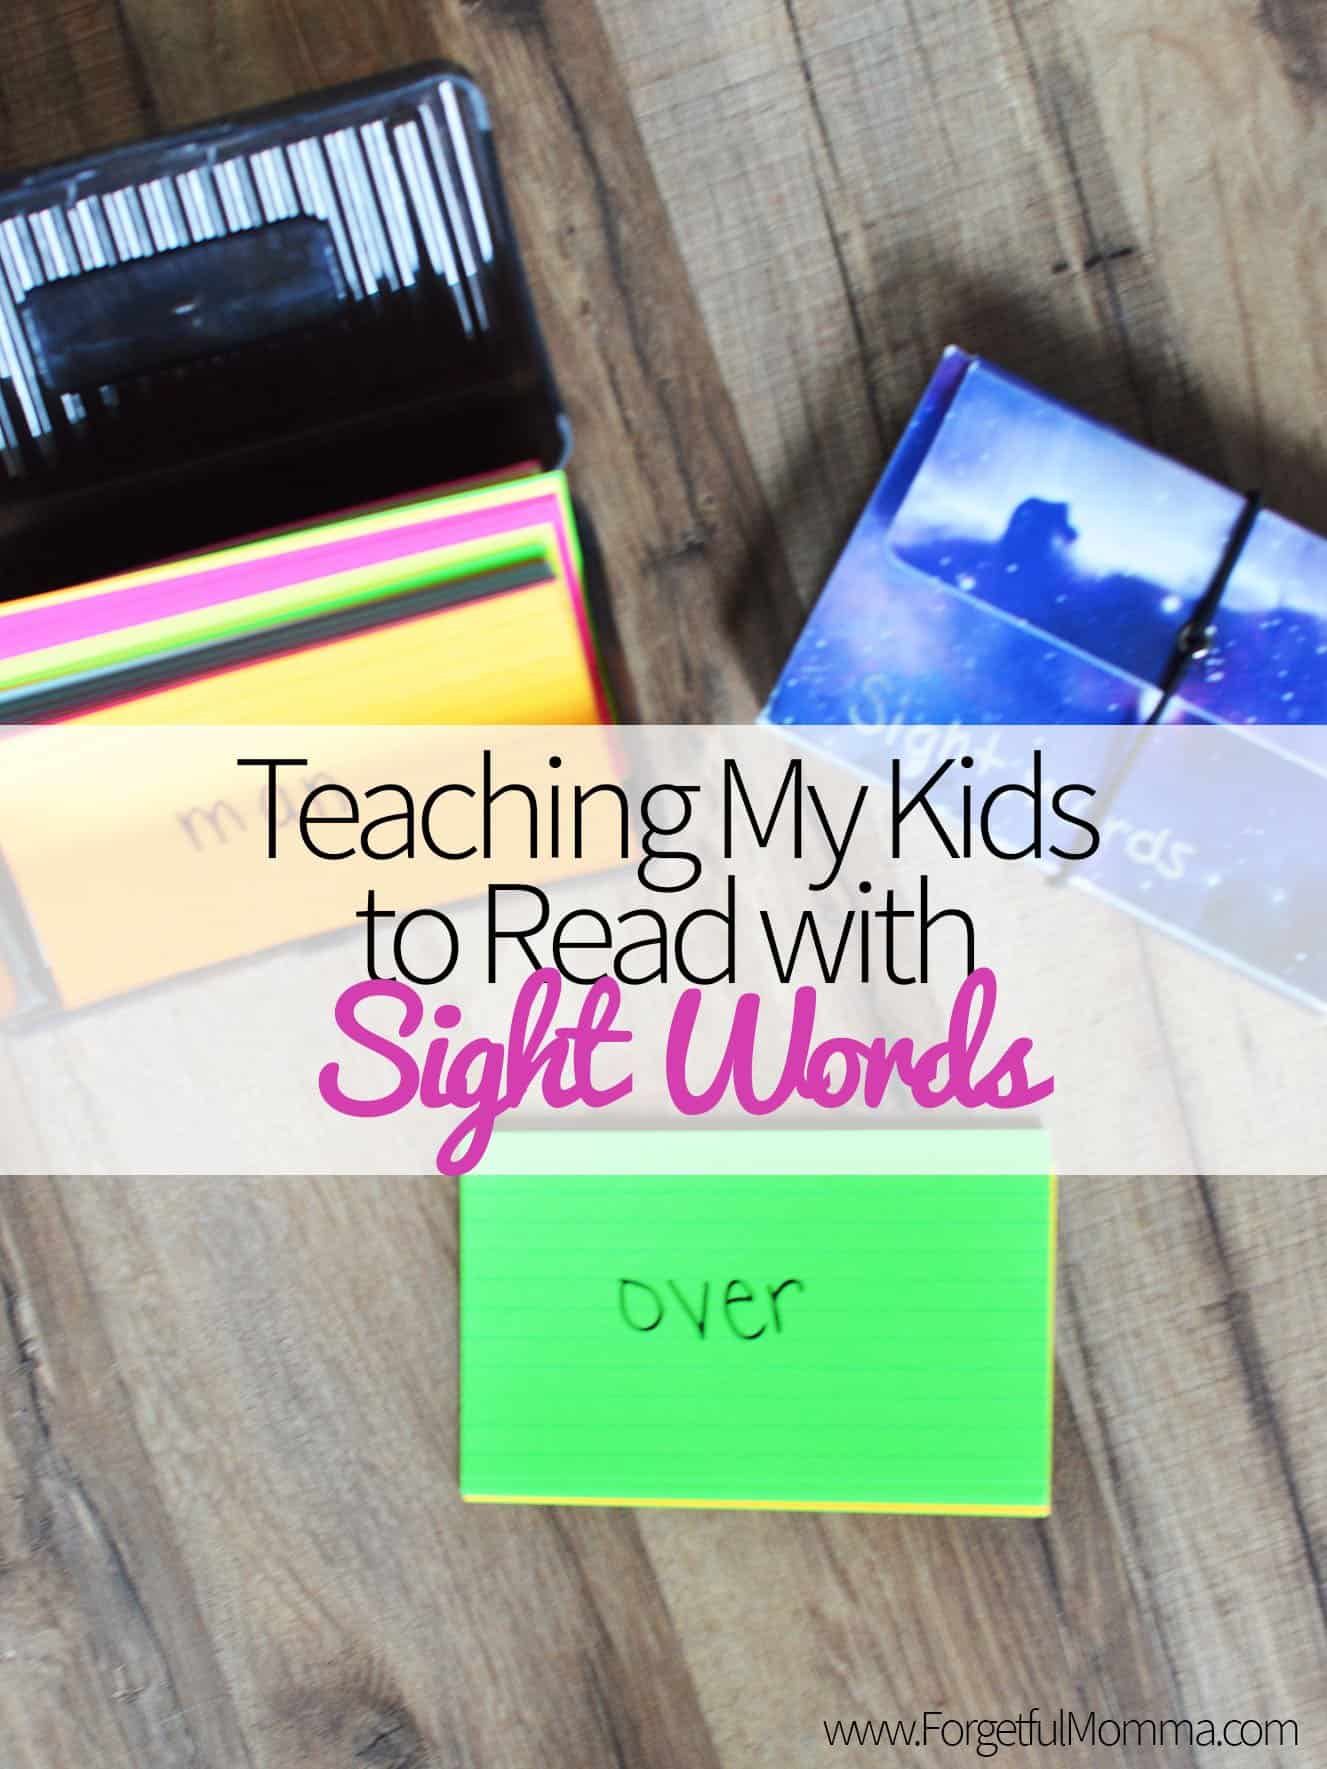 Teaching My Kids to Read with Sight Words